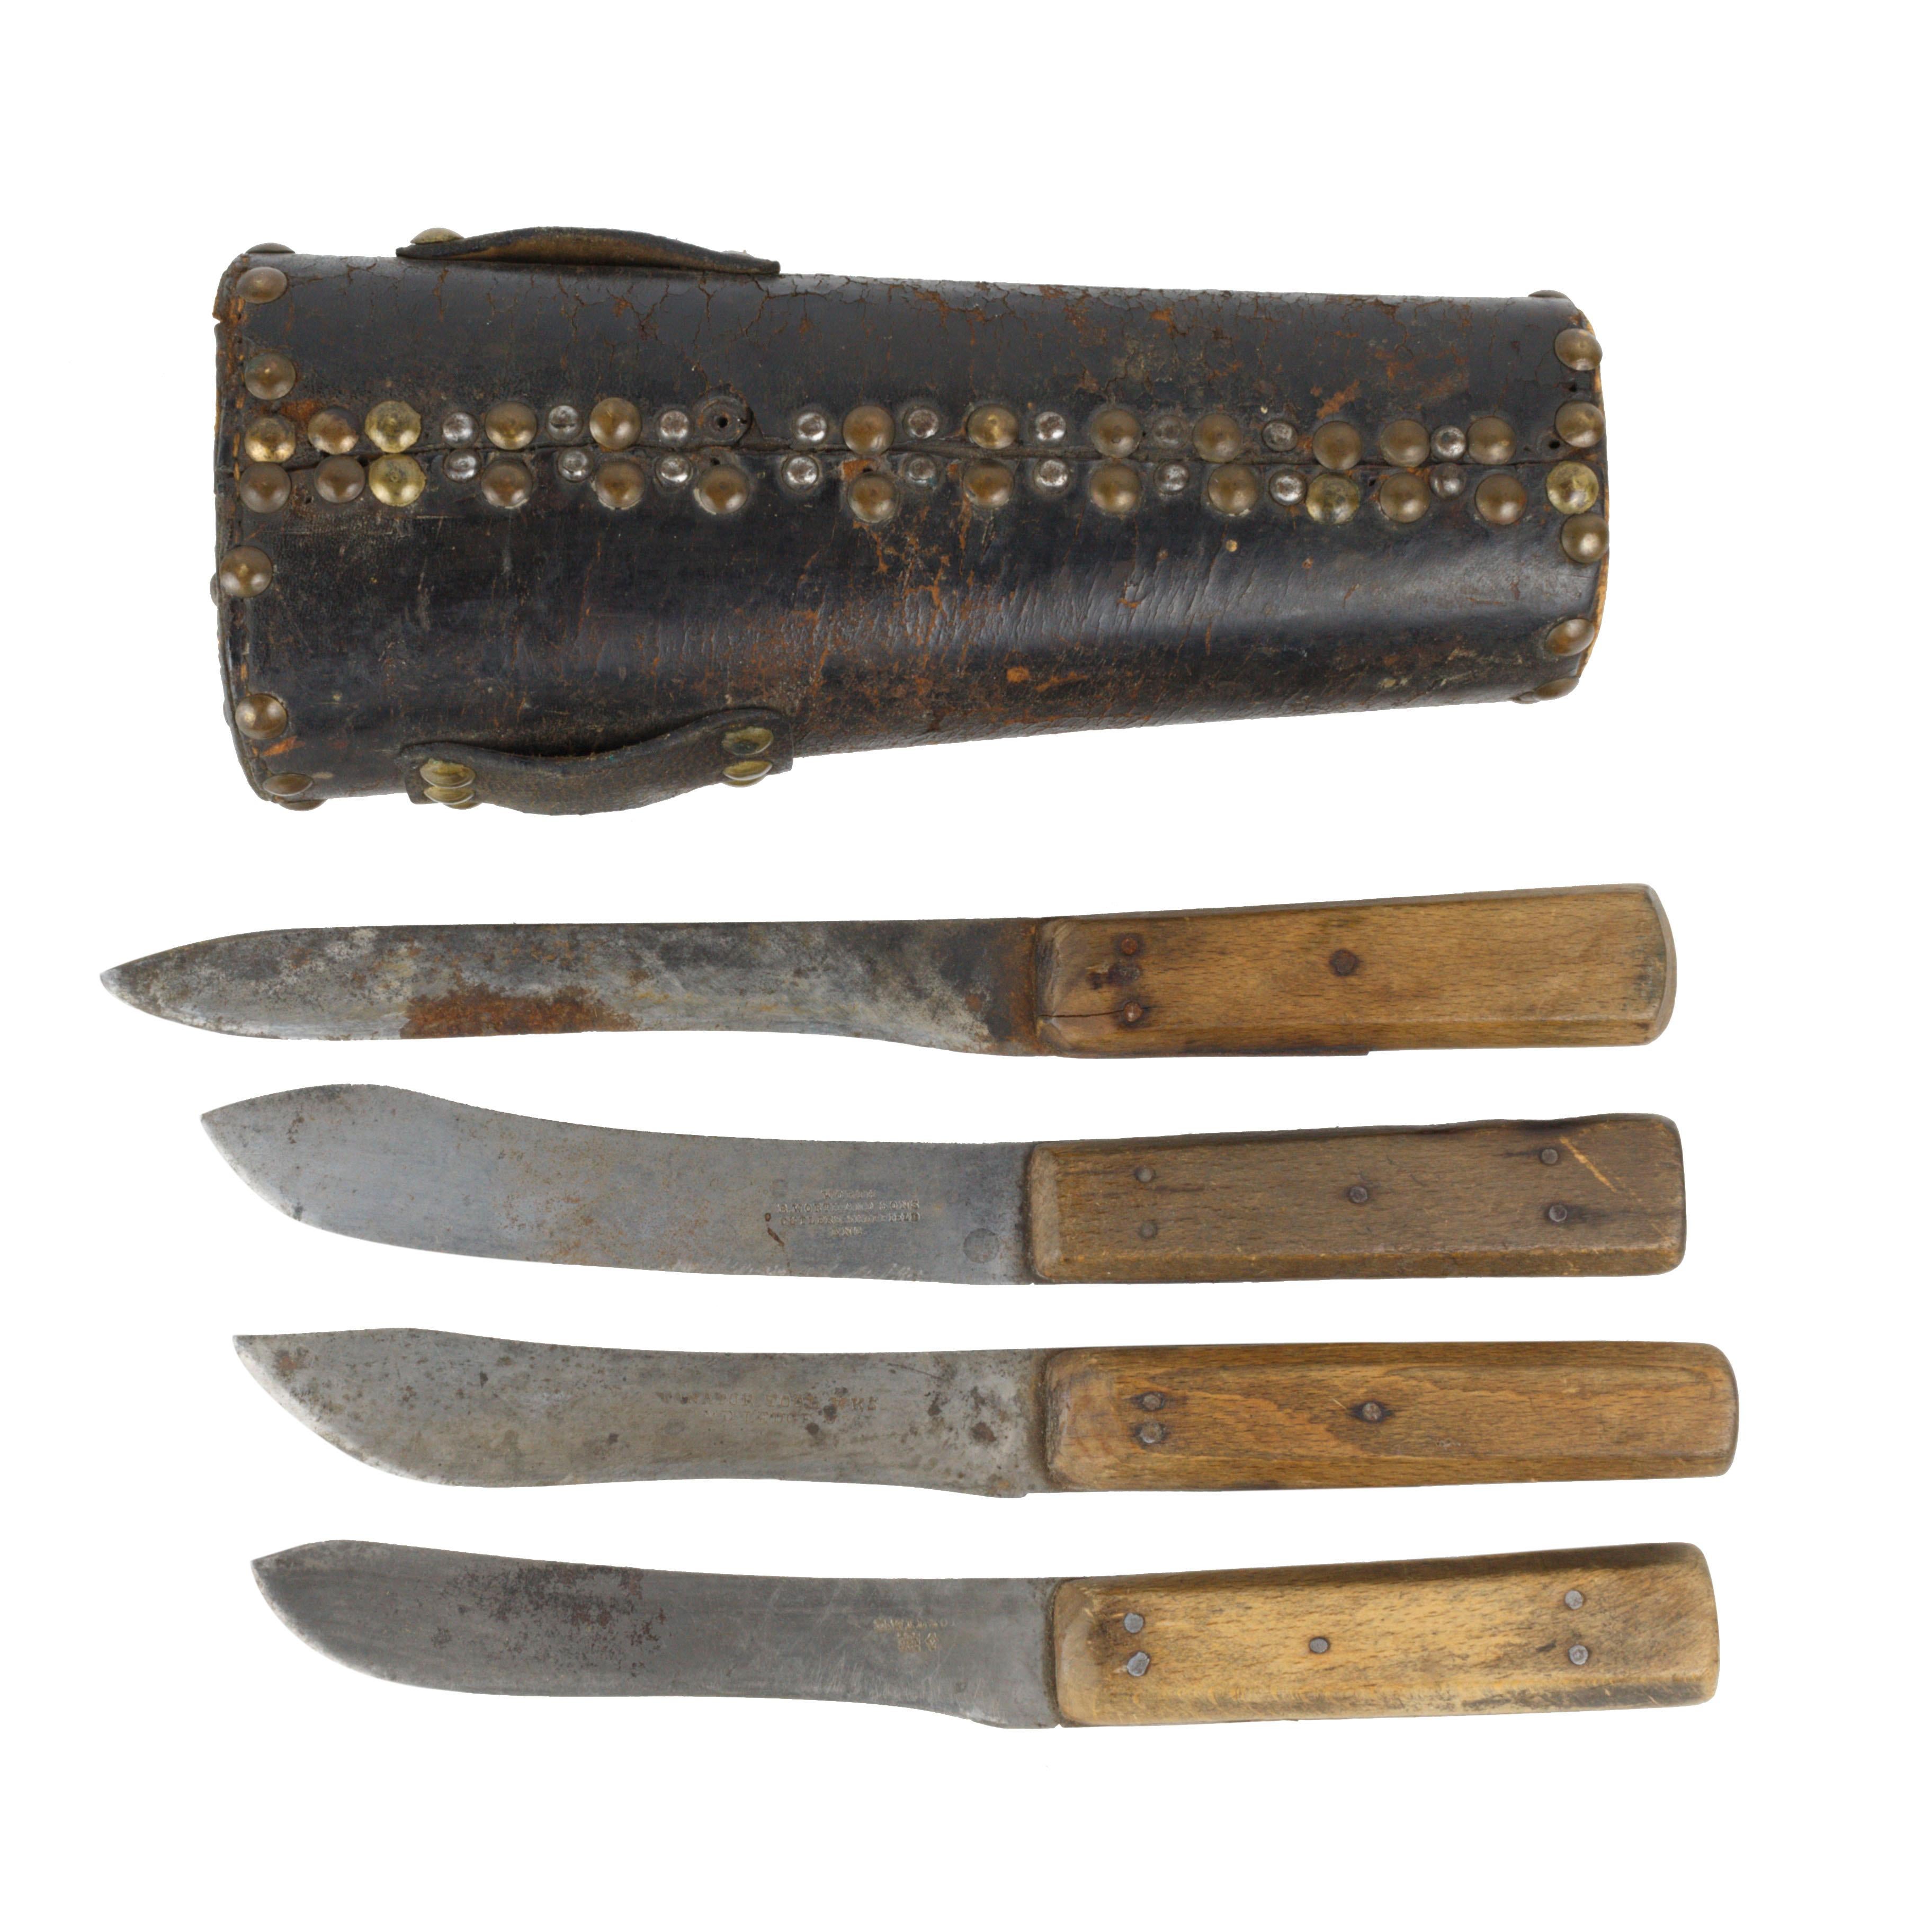 Buffalo hunter skinning set of 4 knives in leather covered wood pouch with tacks. First knife as 6.75